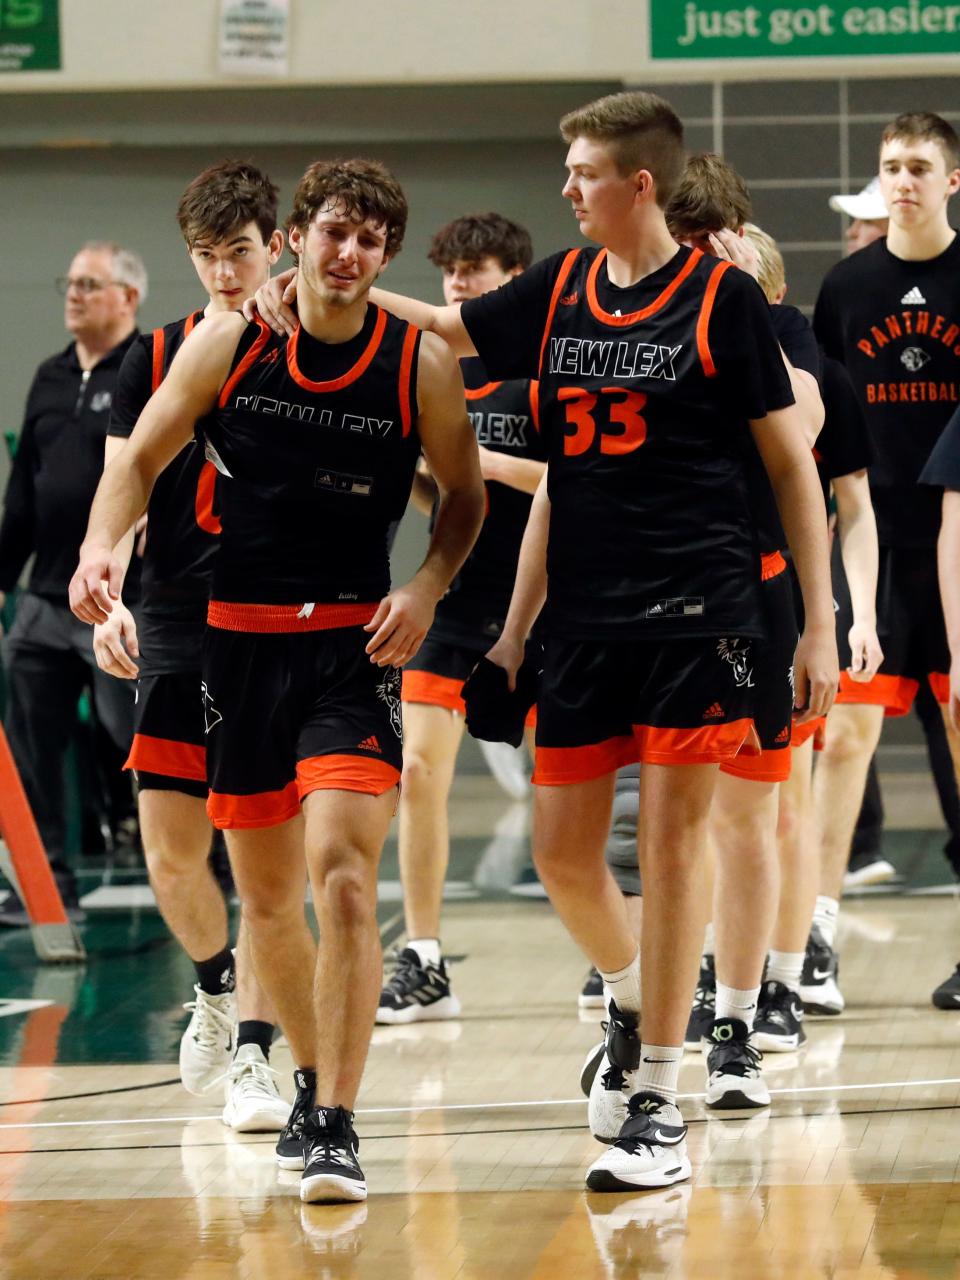 New Lexington senior Lukas Ratliff, left, is consoled by classmate Brody Agriesti as the Panthers exited the floor following a 58-41 season-ending loss to Fairfield Union in a Division II district final on March 5, 2023, at The Convocation Center in Athens. Ratliff scored a team-high 19 points with five 3-pointers as New Lex finished 21-5.